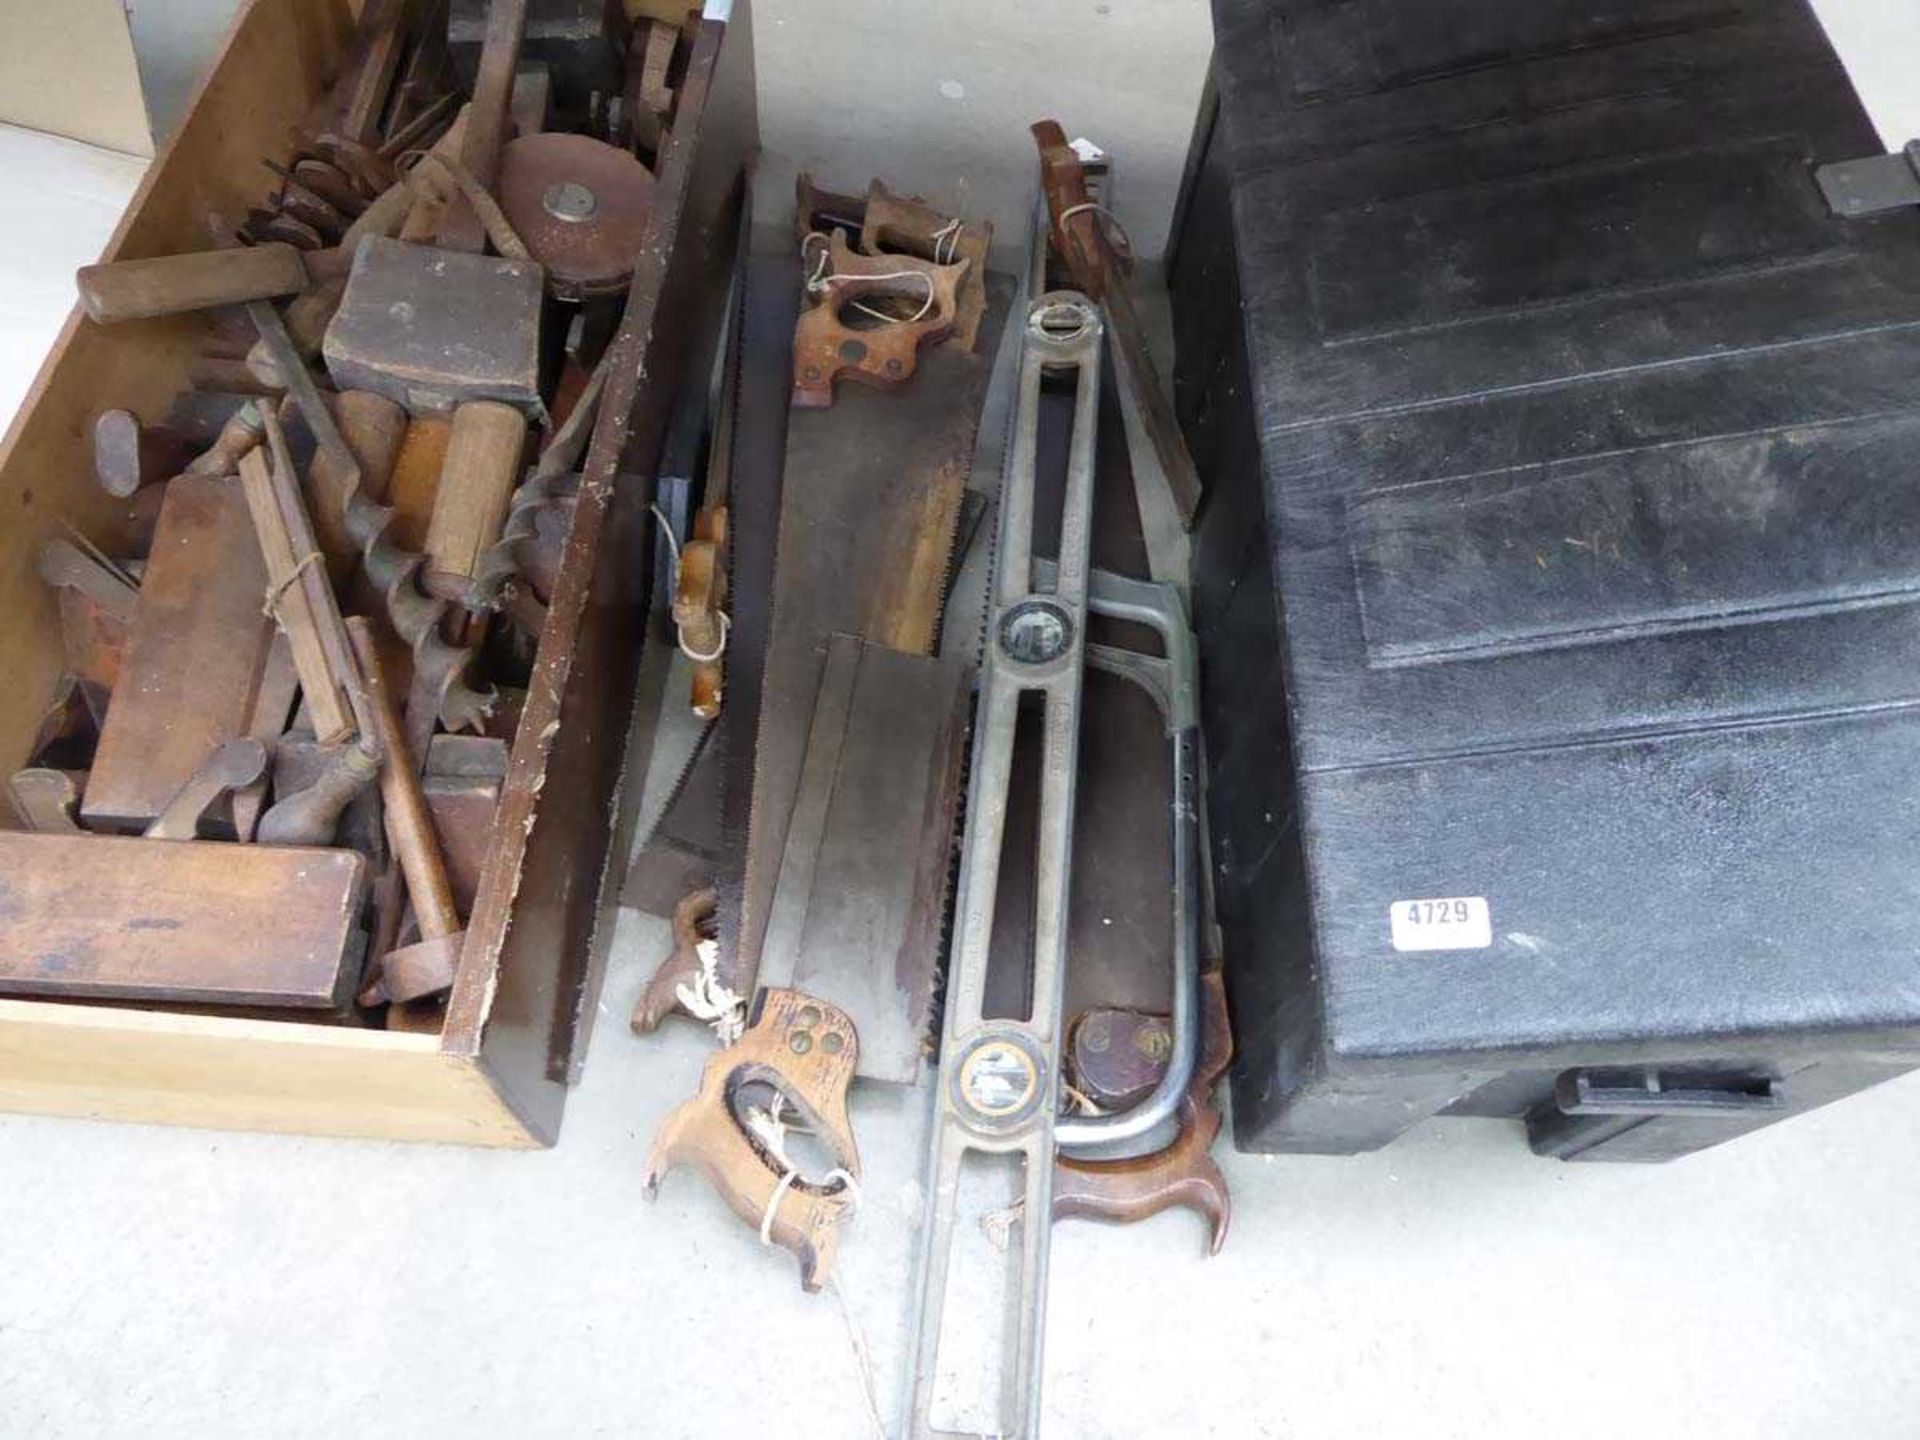 Large underbay of carpenters tools and accessories inc. saws, wooden planes, hand drills, drill bits - Image 2 of 3